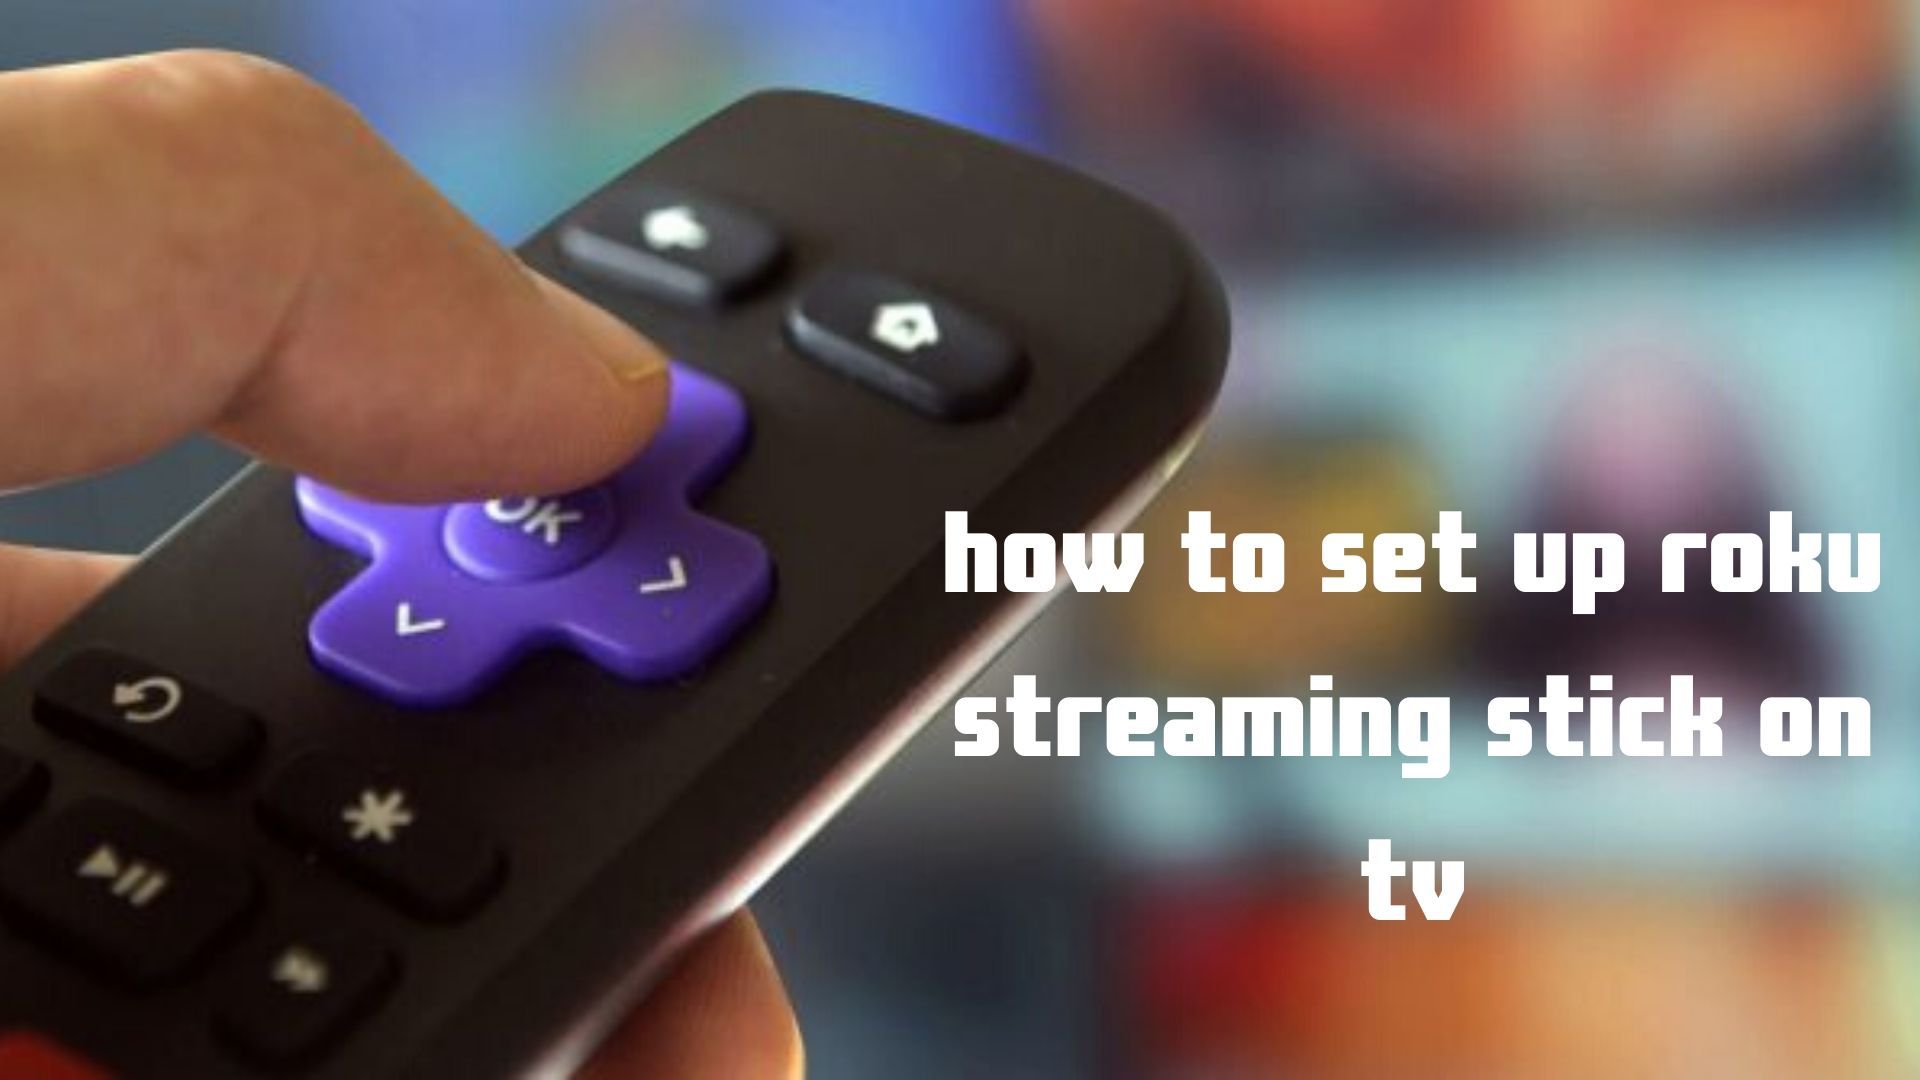 Simple And Easy Way To Install Roku Stick Setup (With images)